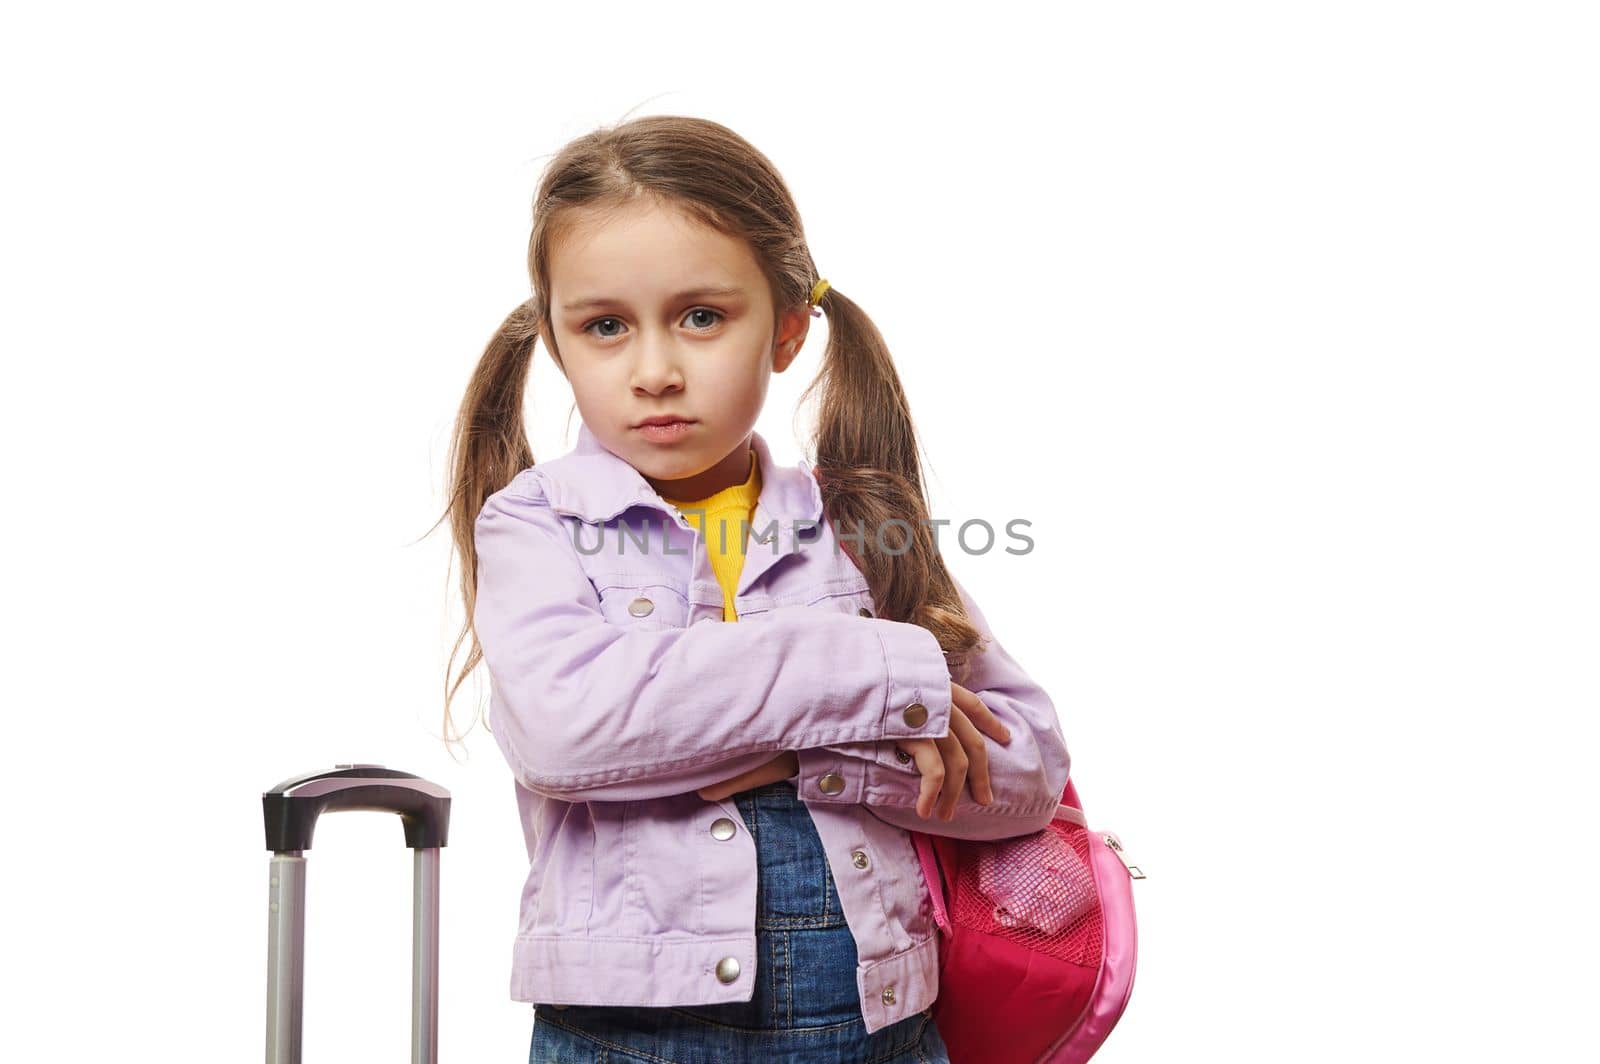 Caucasian pretty baby girl, preschooler child with two ponytails,dressed in purple jacket and blue denim overalls, posing with pink backpack and suitcase over white background. Travel Tourism concept